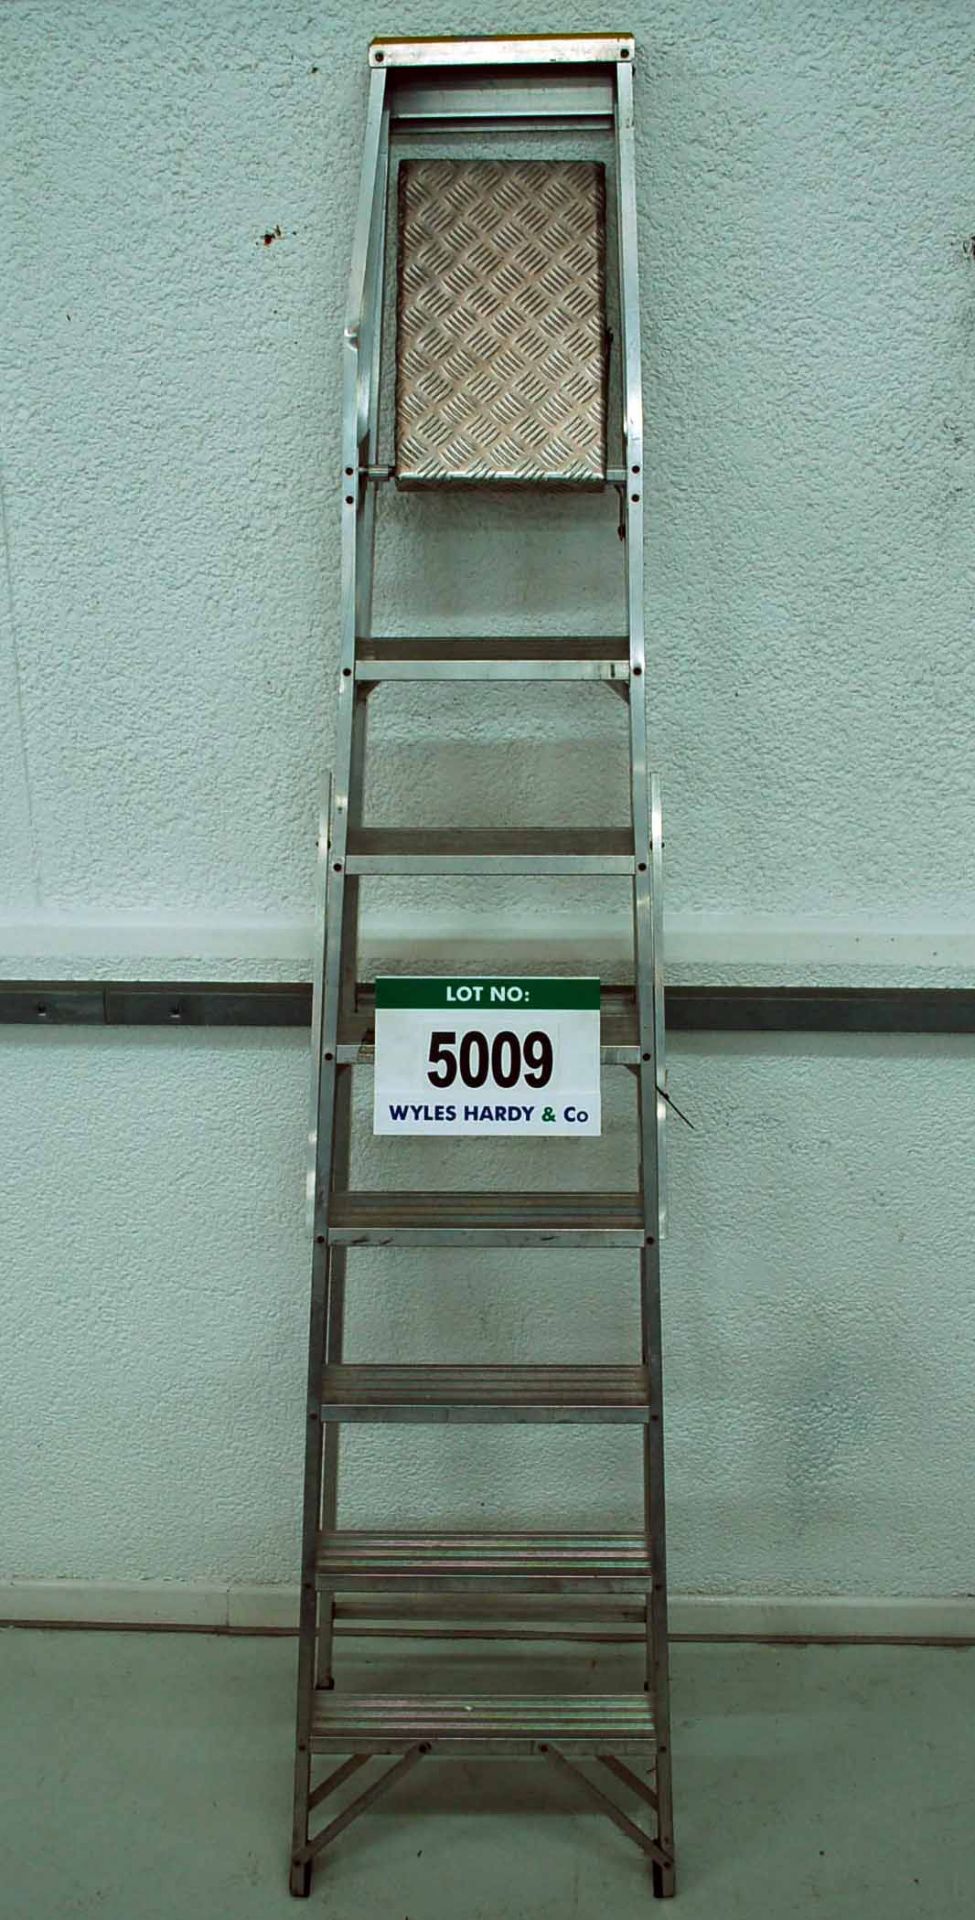 An Alloy 8-Tread Step Ladder (Want it Shipped? http://bit.ly/1wIhCEv)